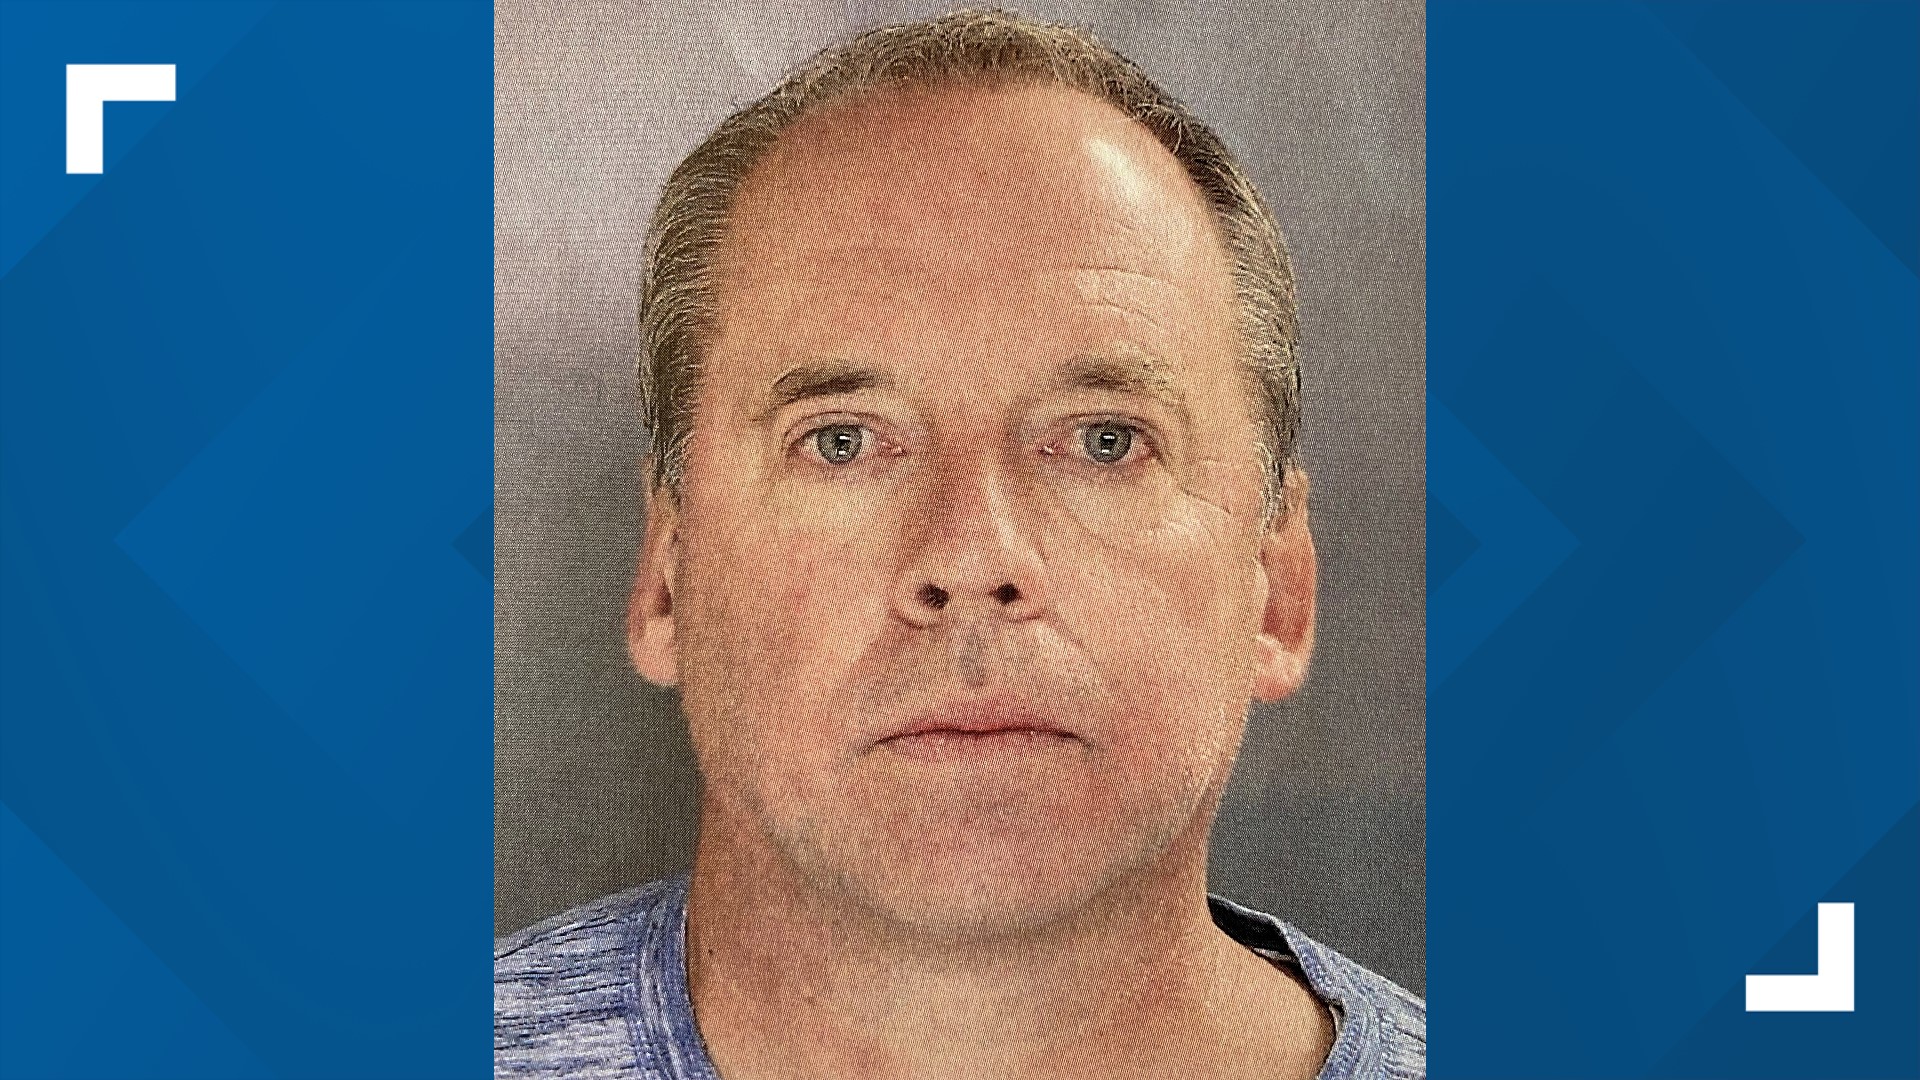 A longtime Scranton police officer was arrested by his own coworkers overnight and charged with aggravated assault, burglary, and other crimes.